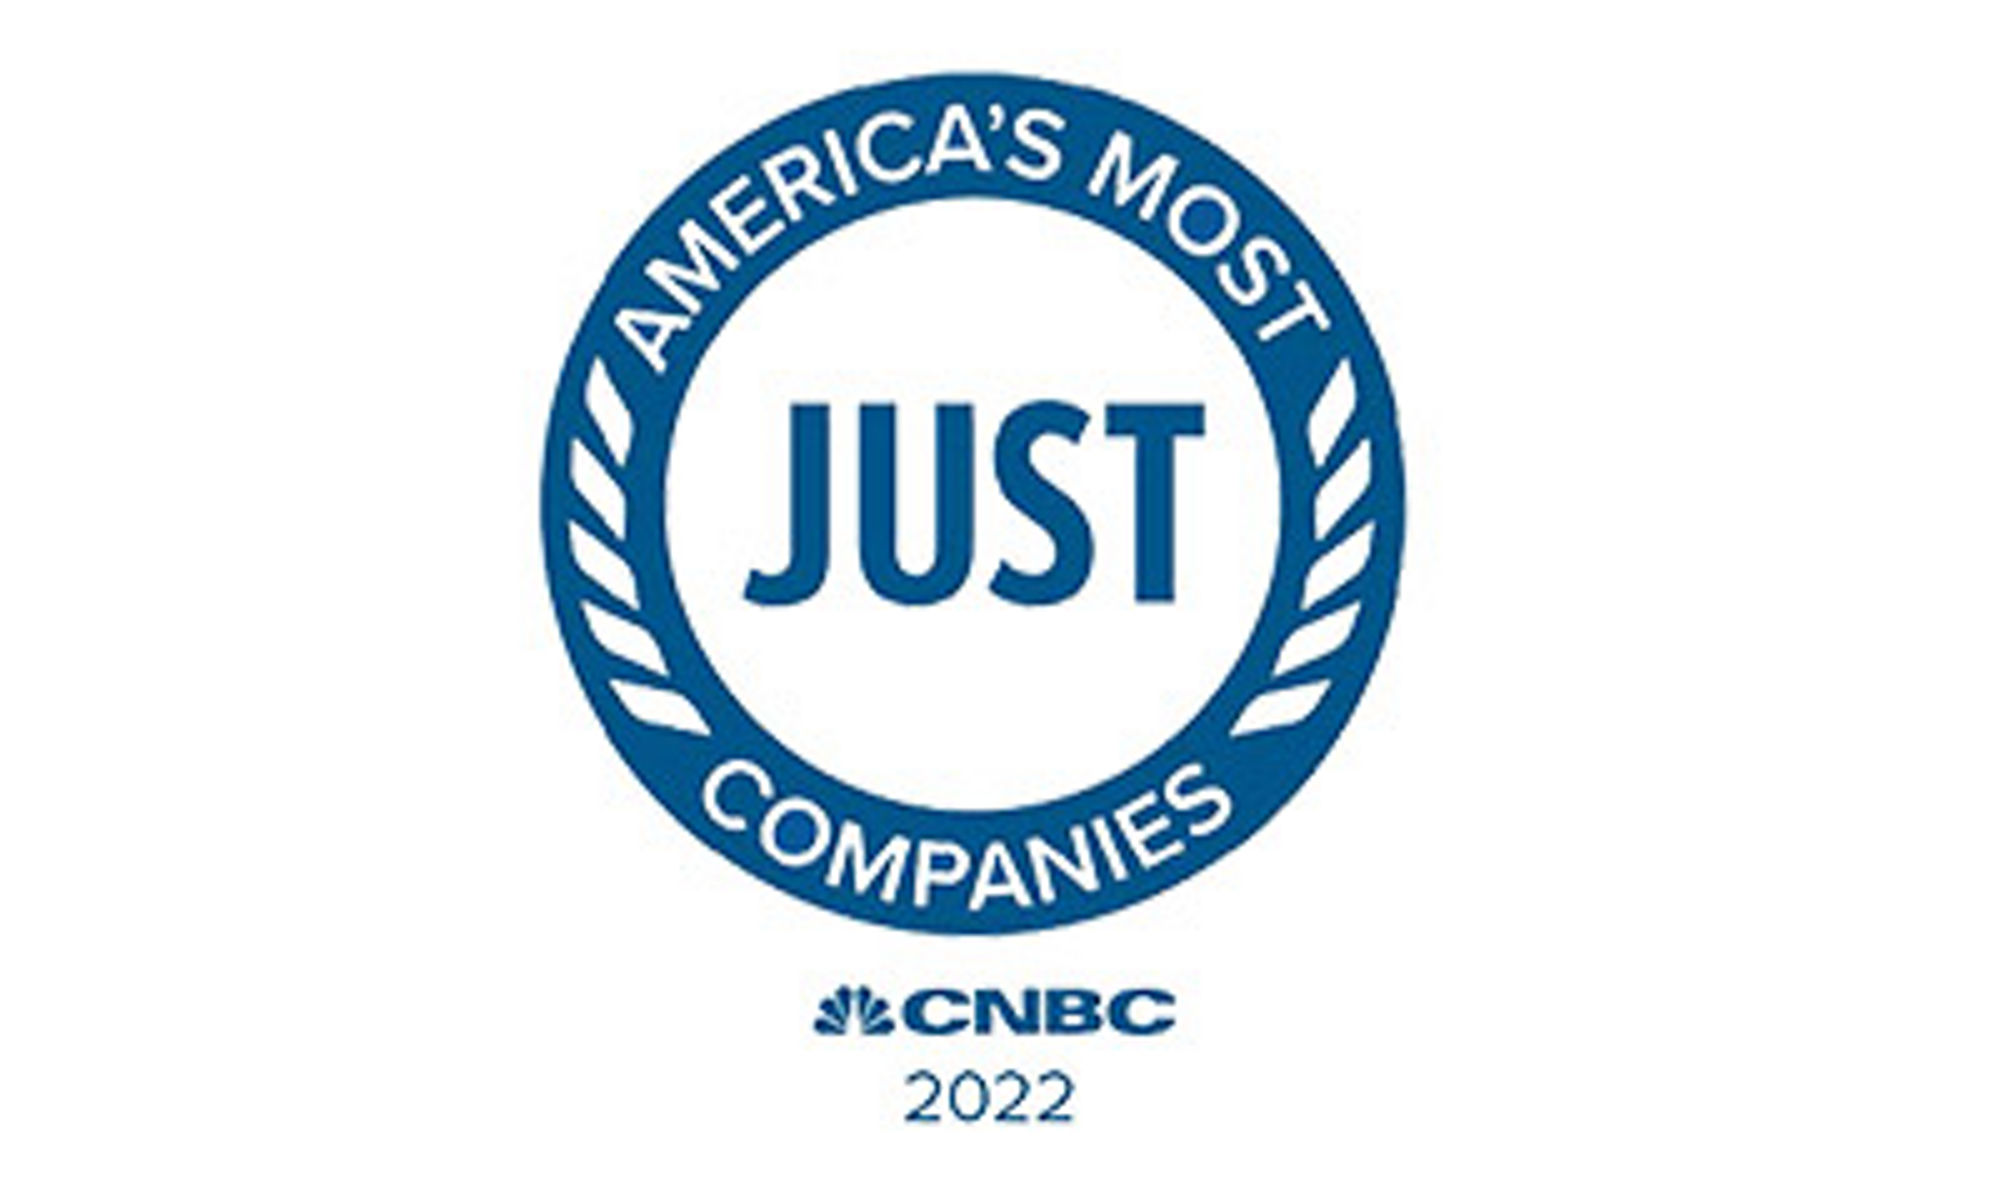 America's Most Just Companies CNBC 2022 logo